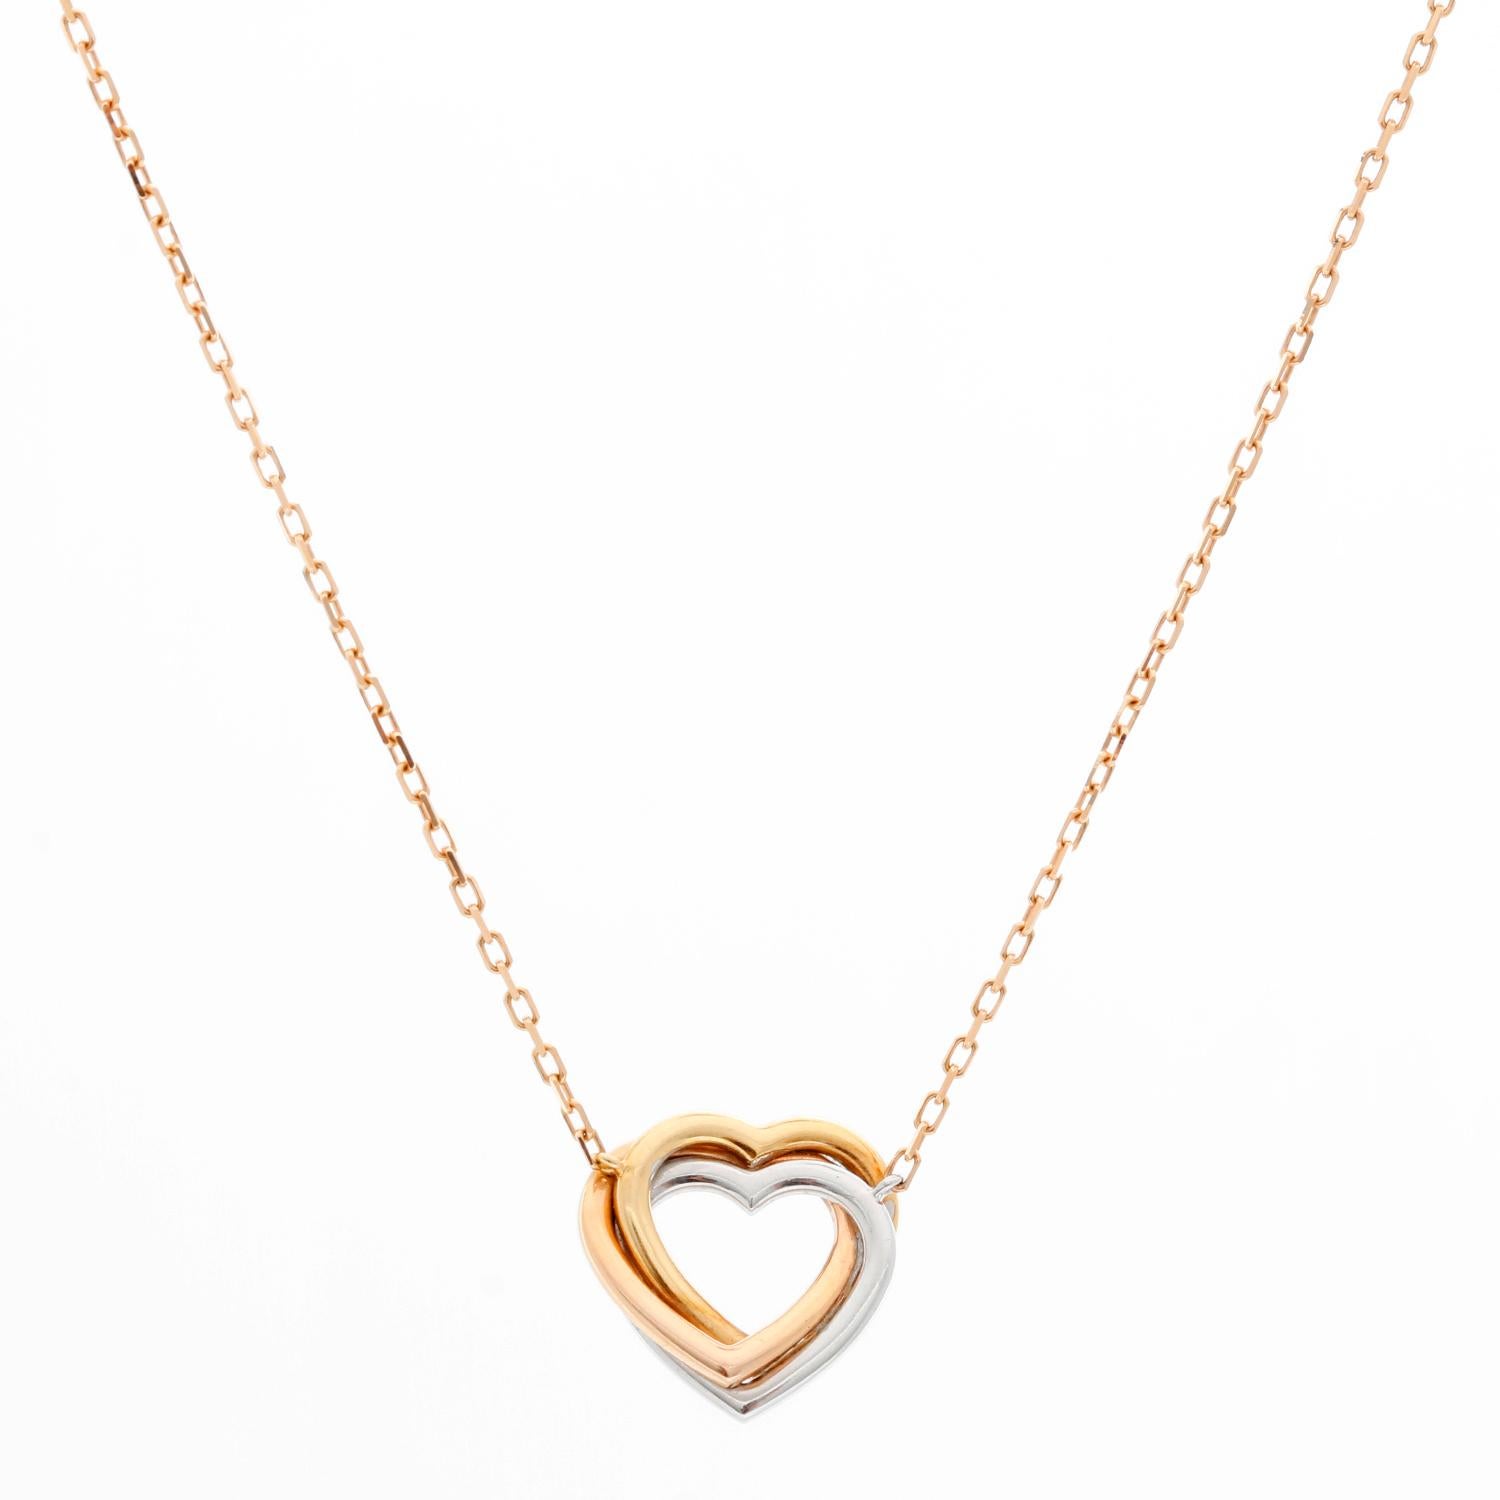 Cartier Trinity de Cartier Heart Diamond Necklace  - This Trinity de Cartier necklace is a true symbol of the spirit of Cartier. It has a pendant crafted with 18k pink, yellow and white gold, decorated with 33 diamonds totaling 0.08 ct. on each